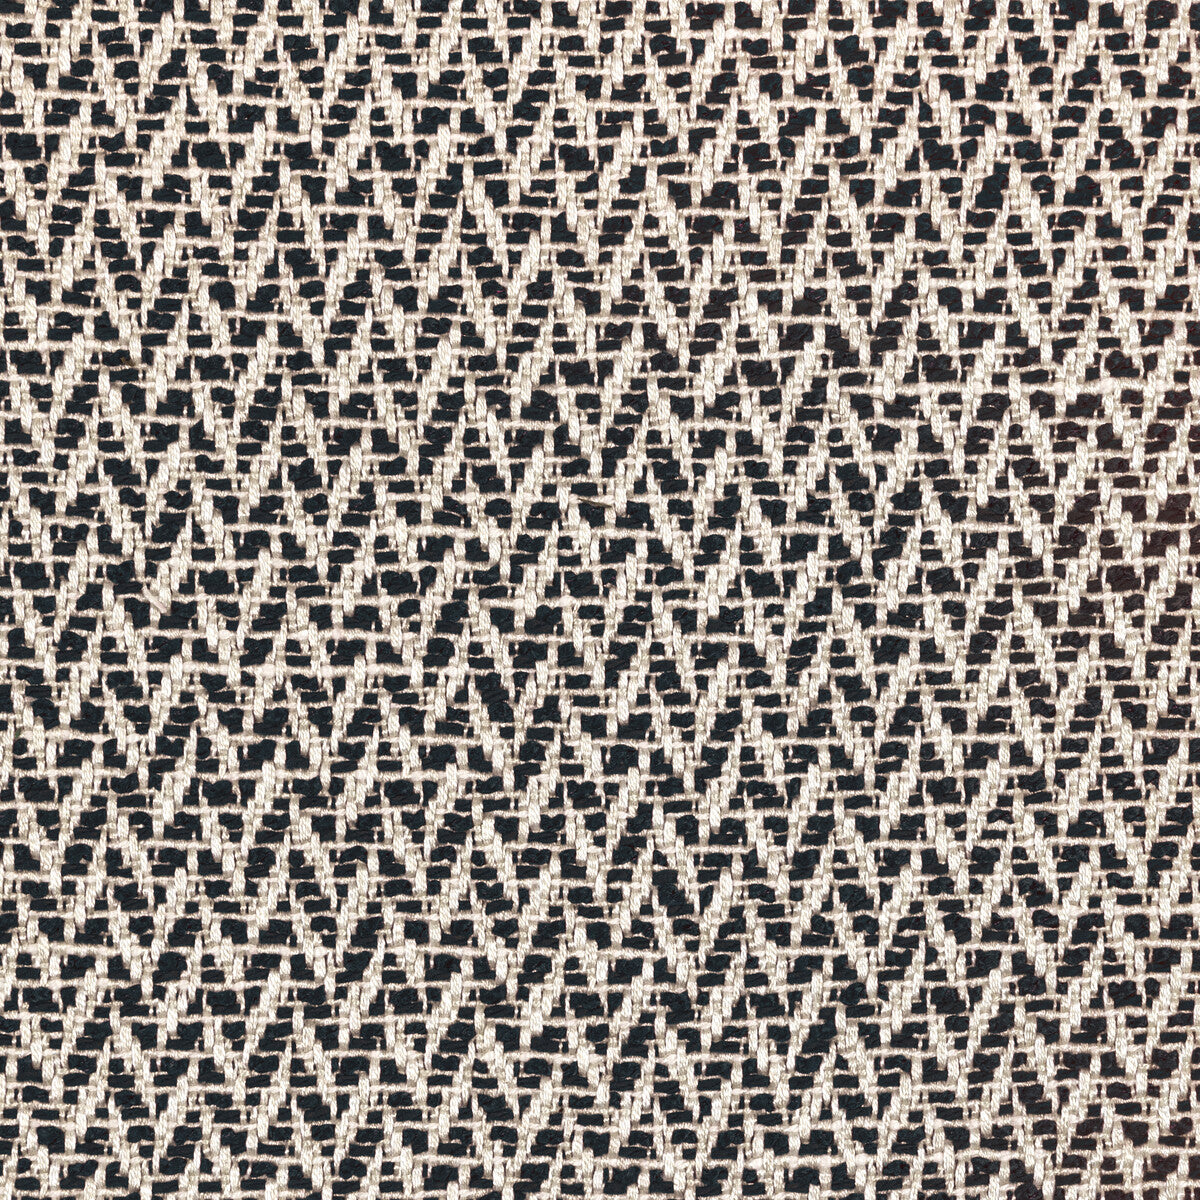 Kravet Design fabric in 36418-8 color - pattern 36418.8.0 - by Kravet Design in the Performance Crypton Home collection